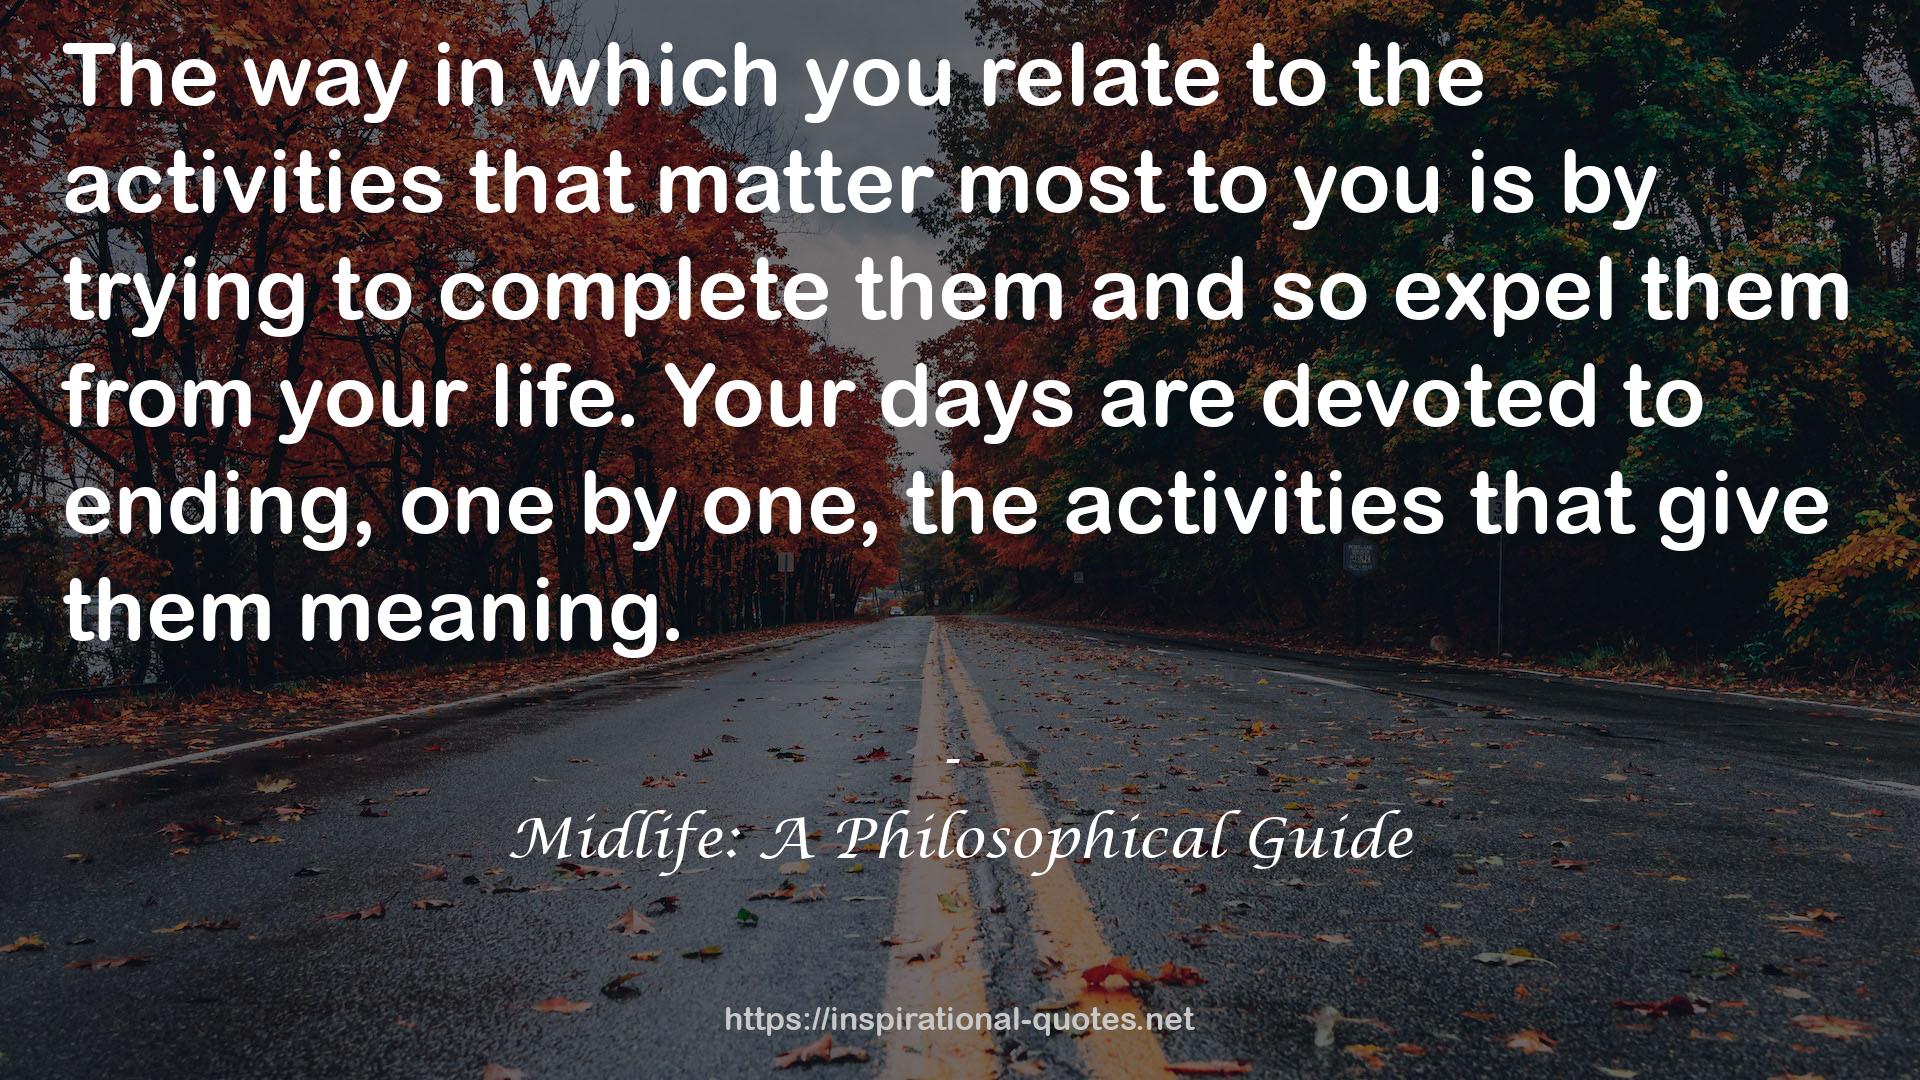 Midlife: A Philosophical Guide QUOTES